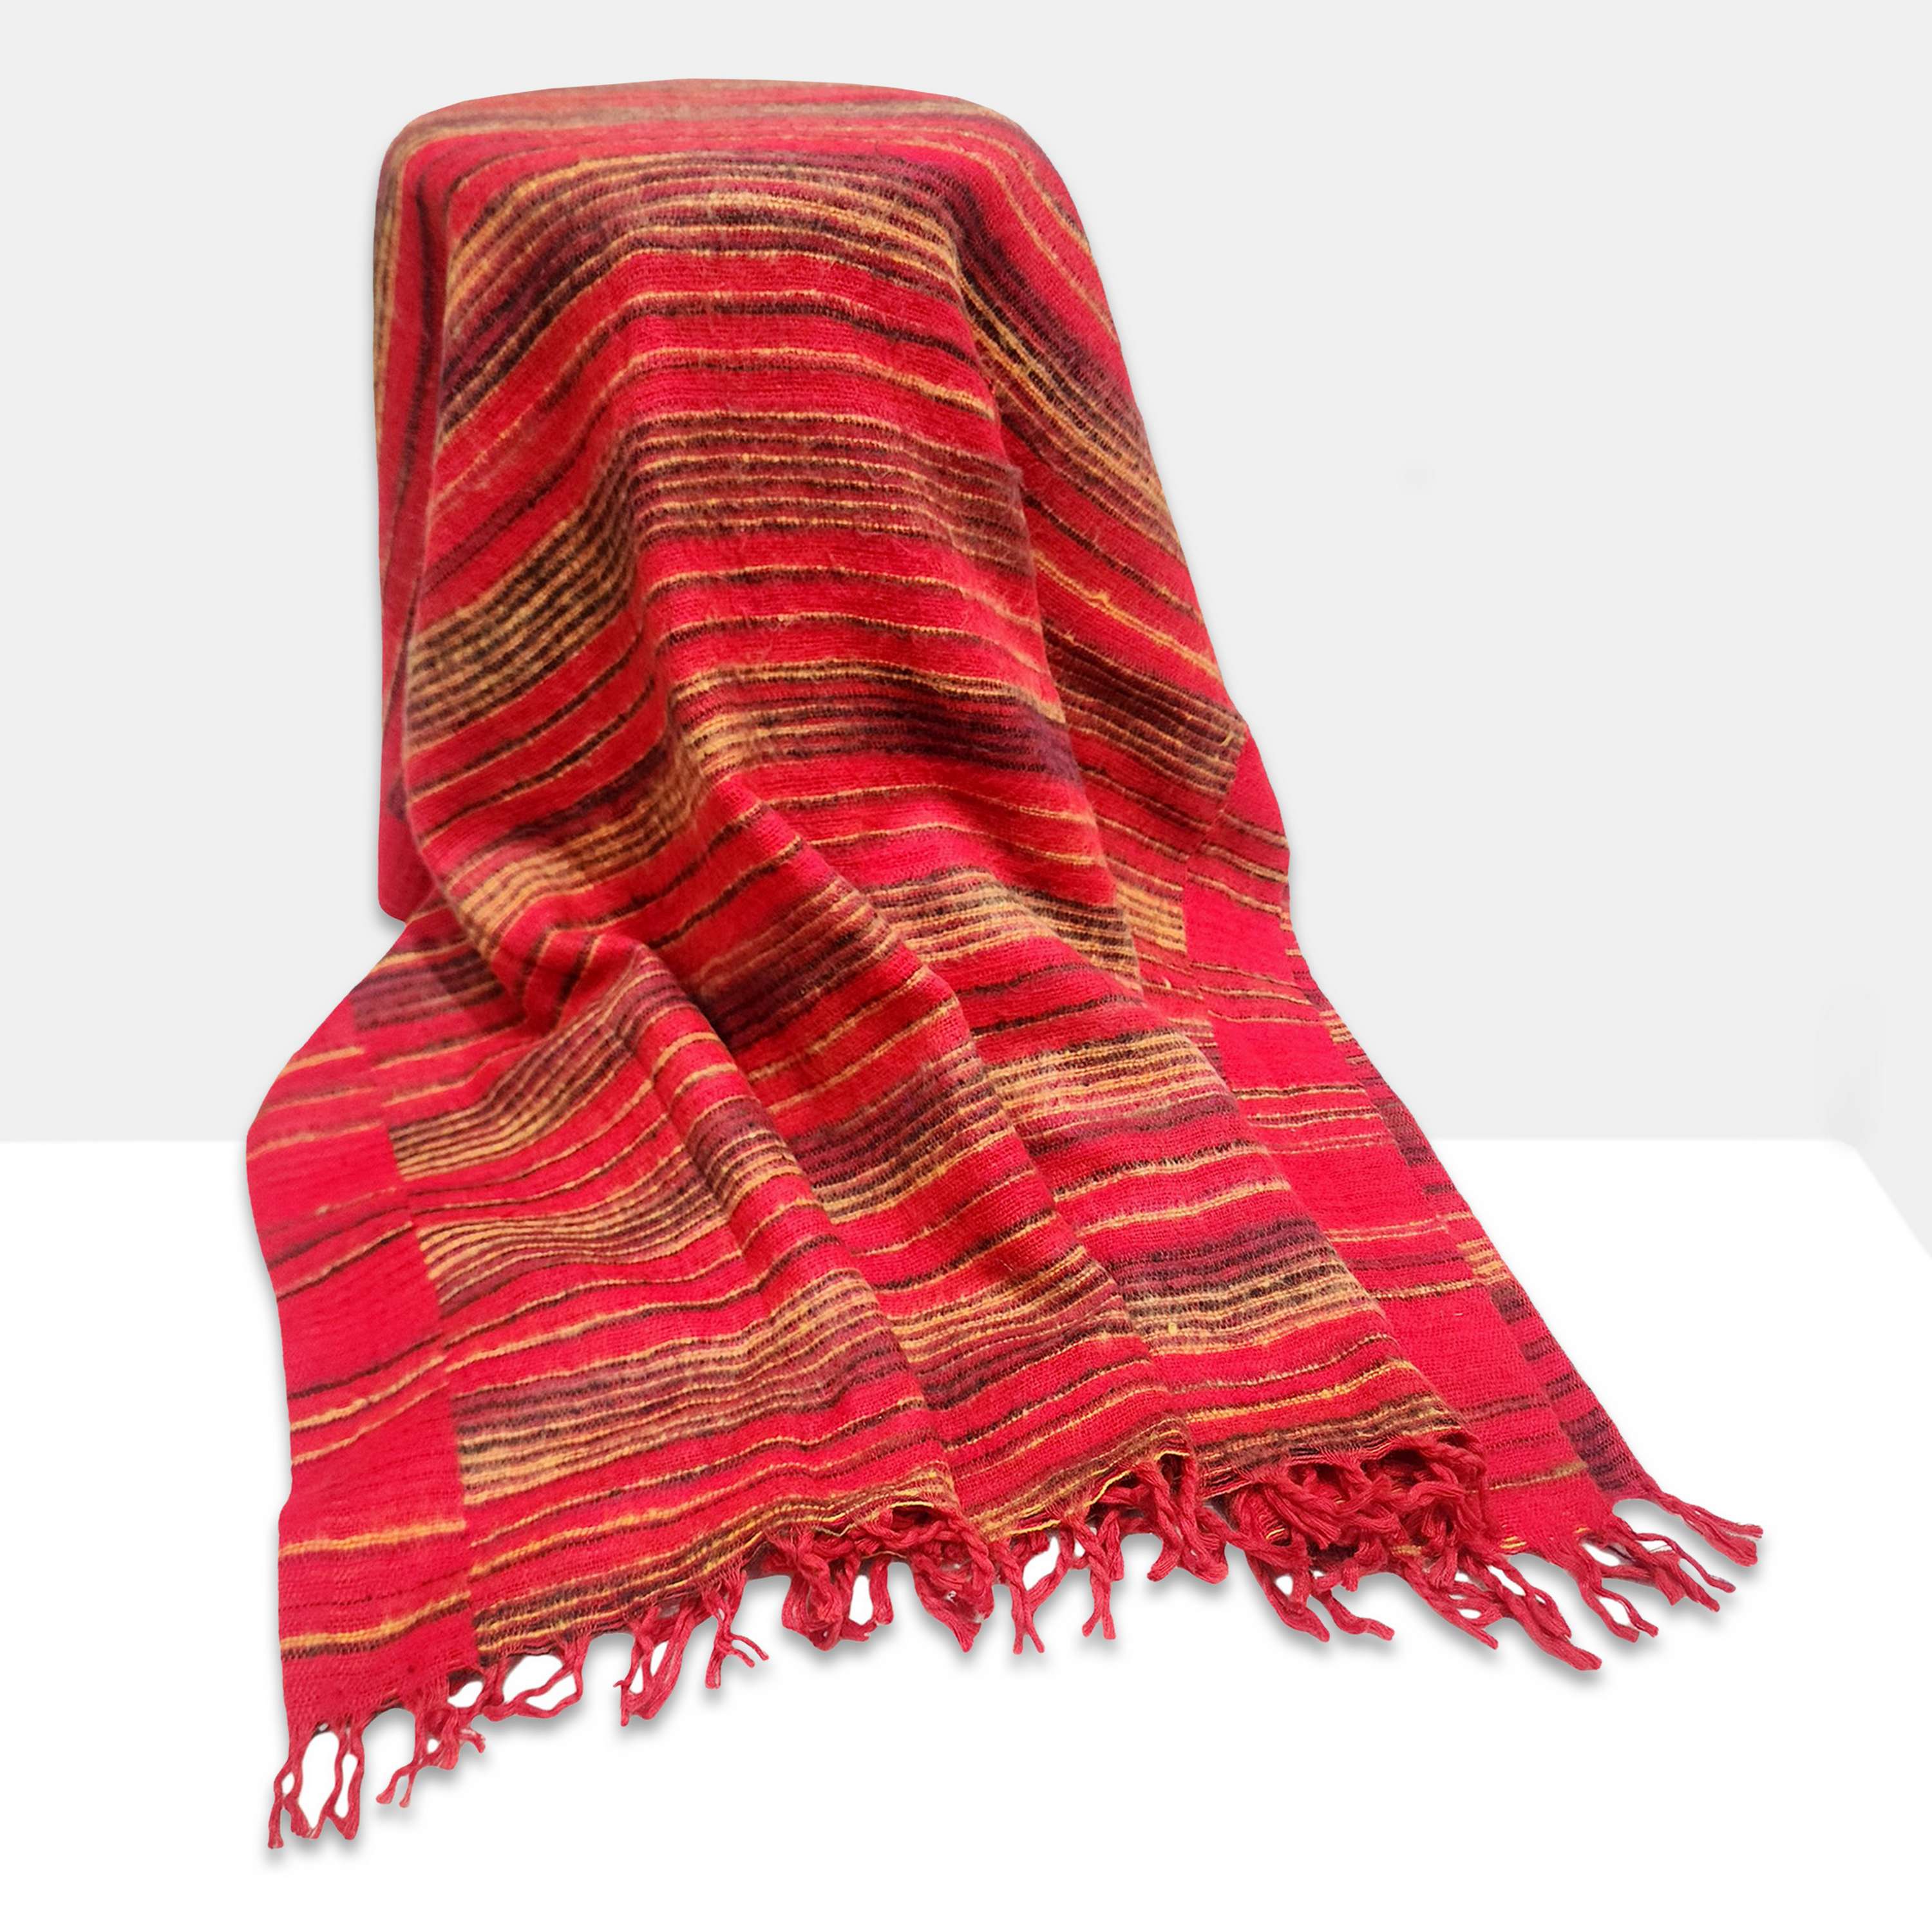 Tibet Shawl, Durable Elegance: Acrylic Woolen Shawls For All Seasons In Crimson Color And Stripes